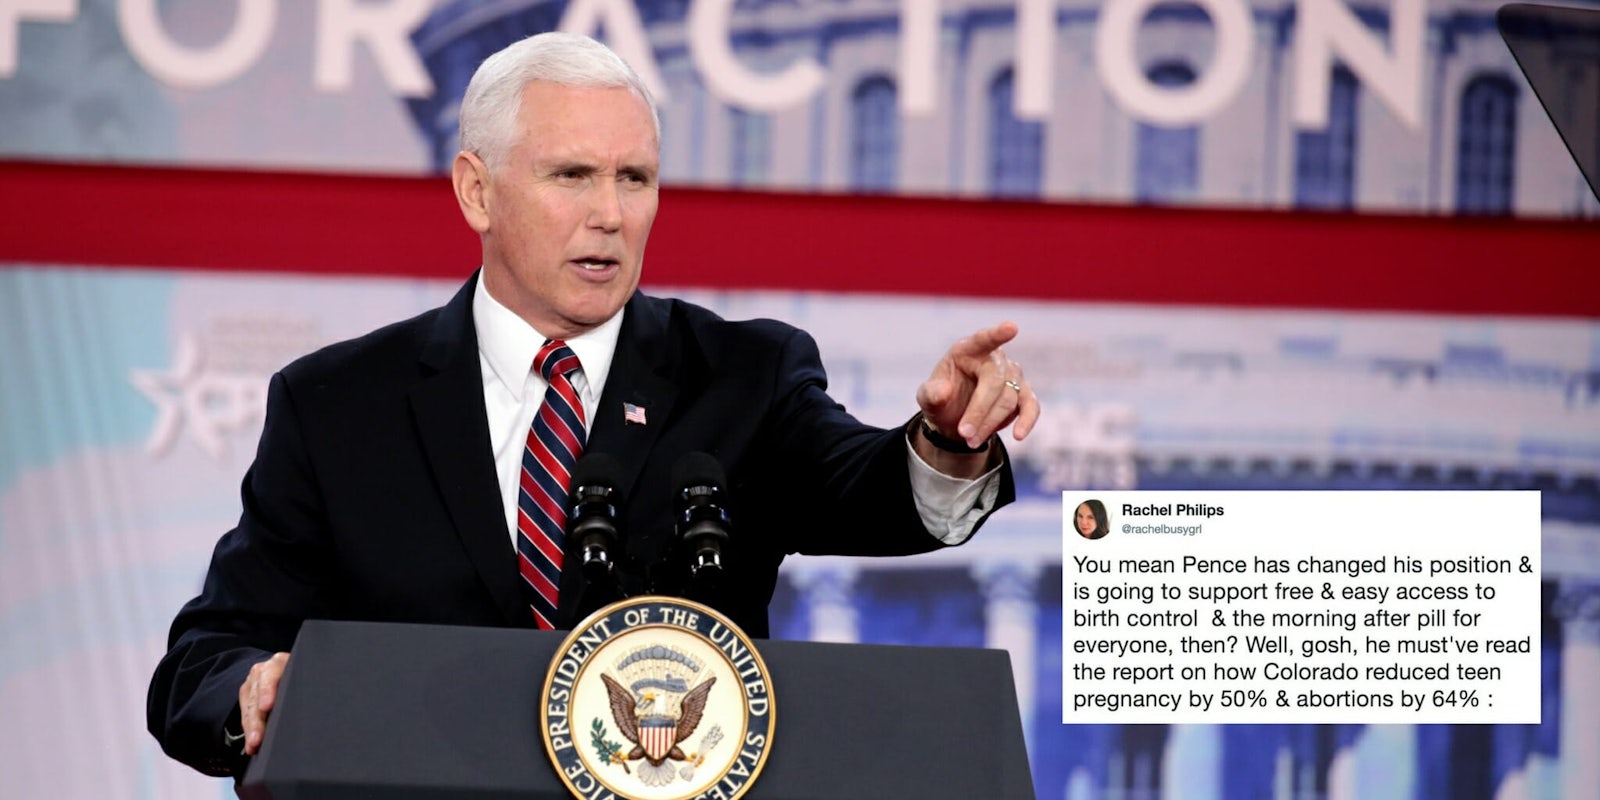 Mike Pence at 2018 Conservative Political Action Conference (CPAC) in National Harbor, Maryland, next to a tweet lambasting his abortion comments.